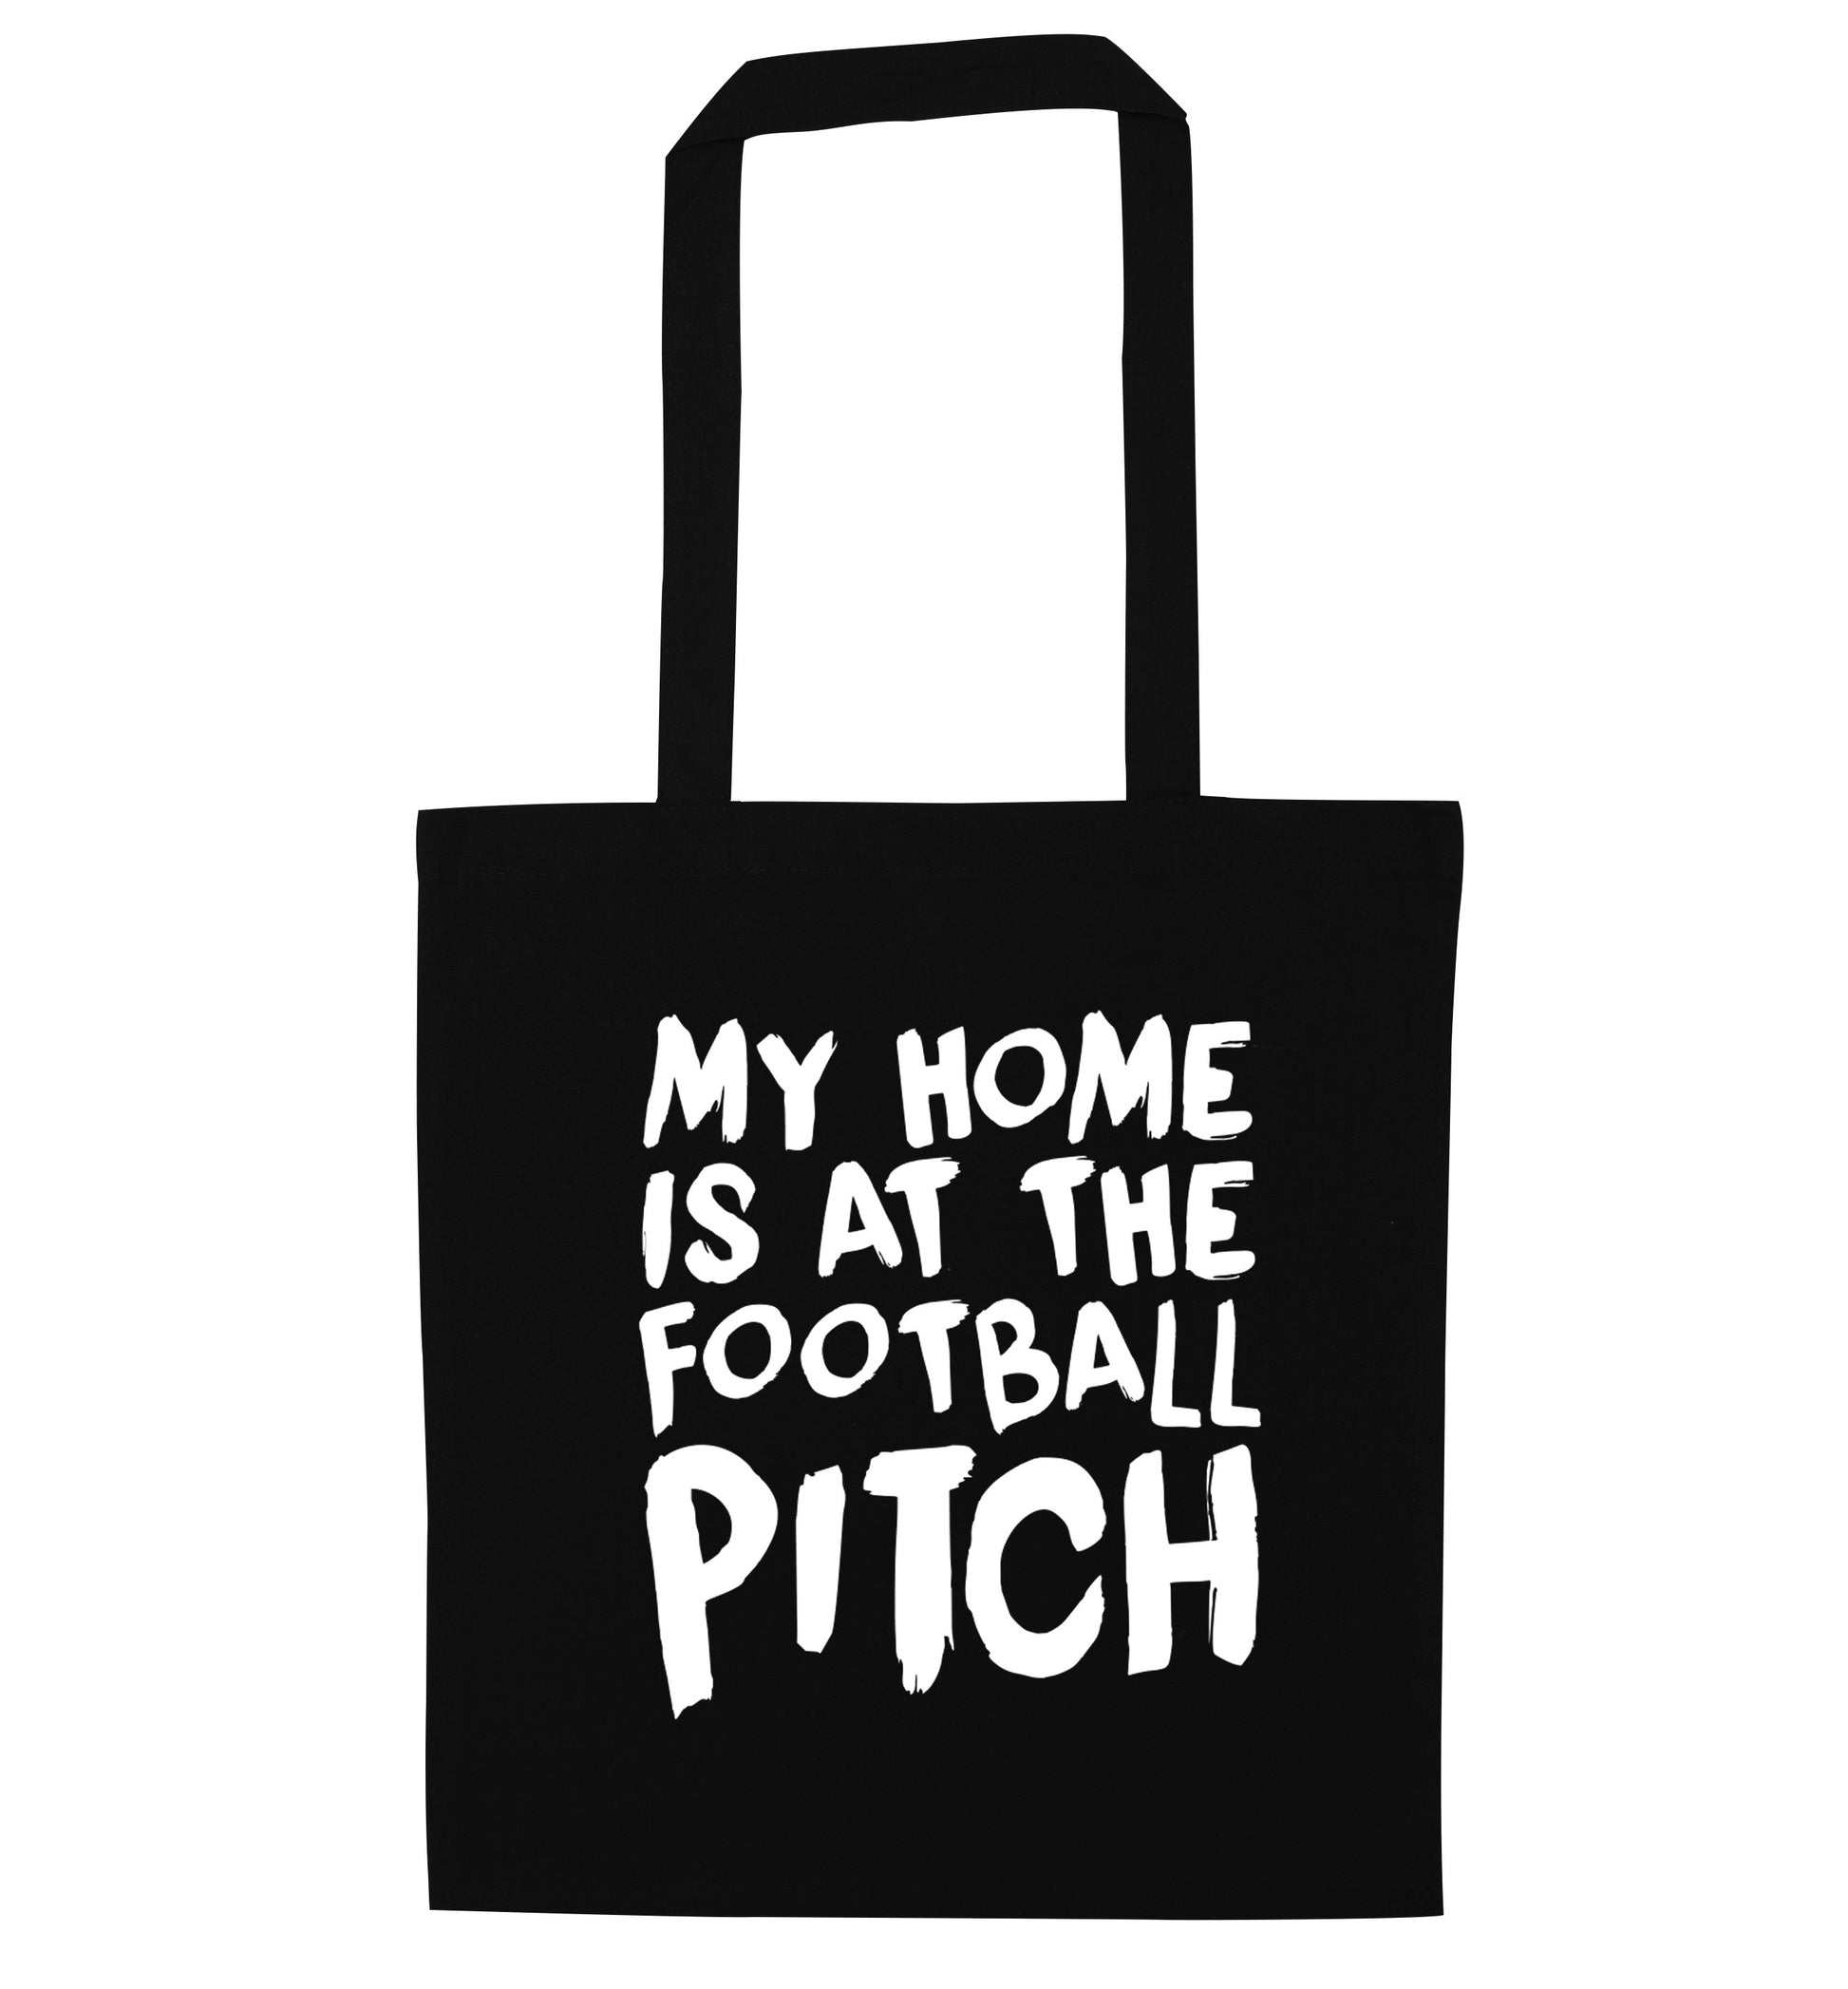 My home is at the football pitch black tote bag